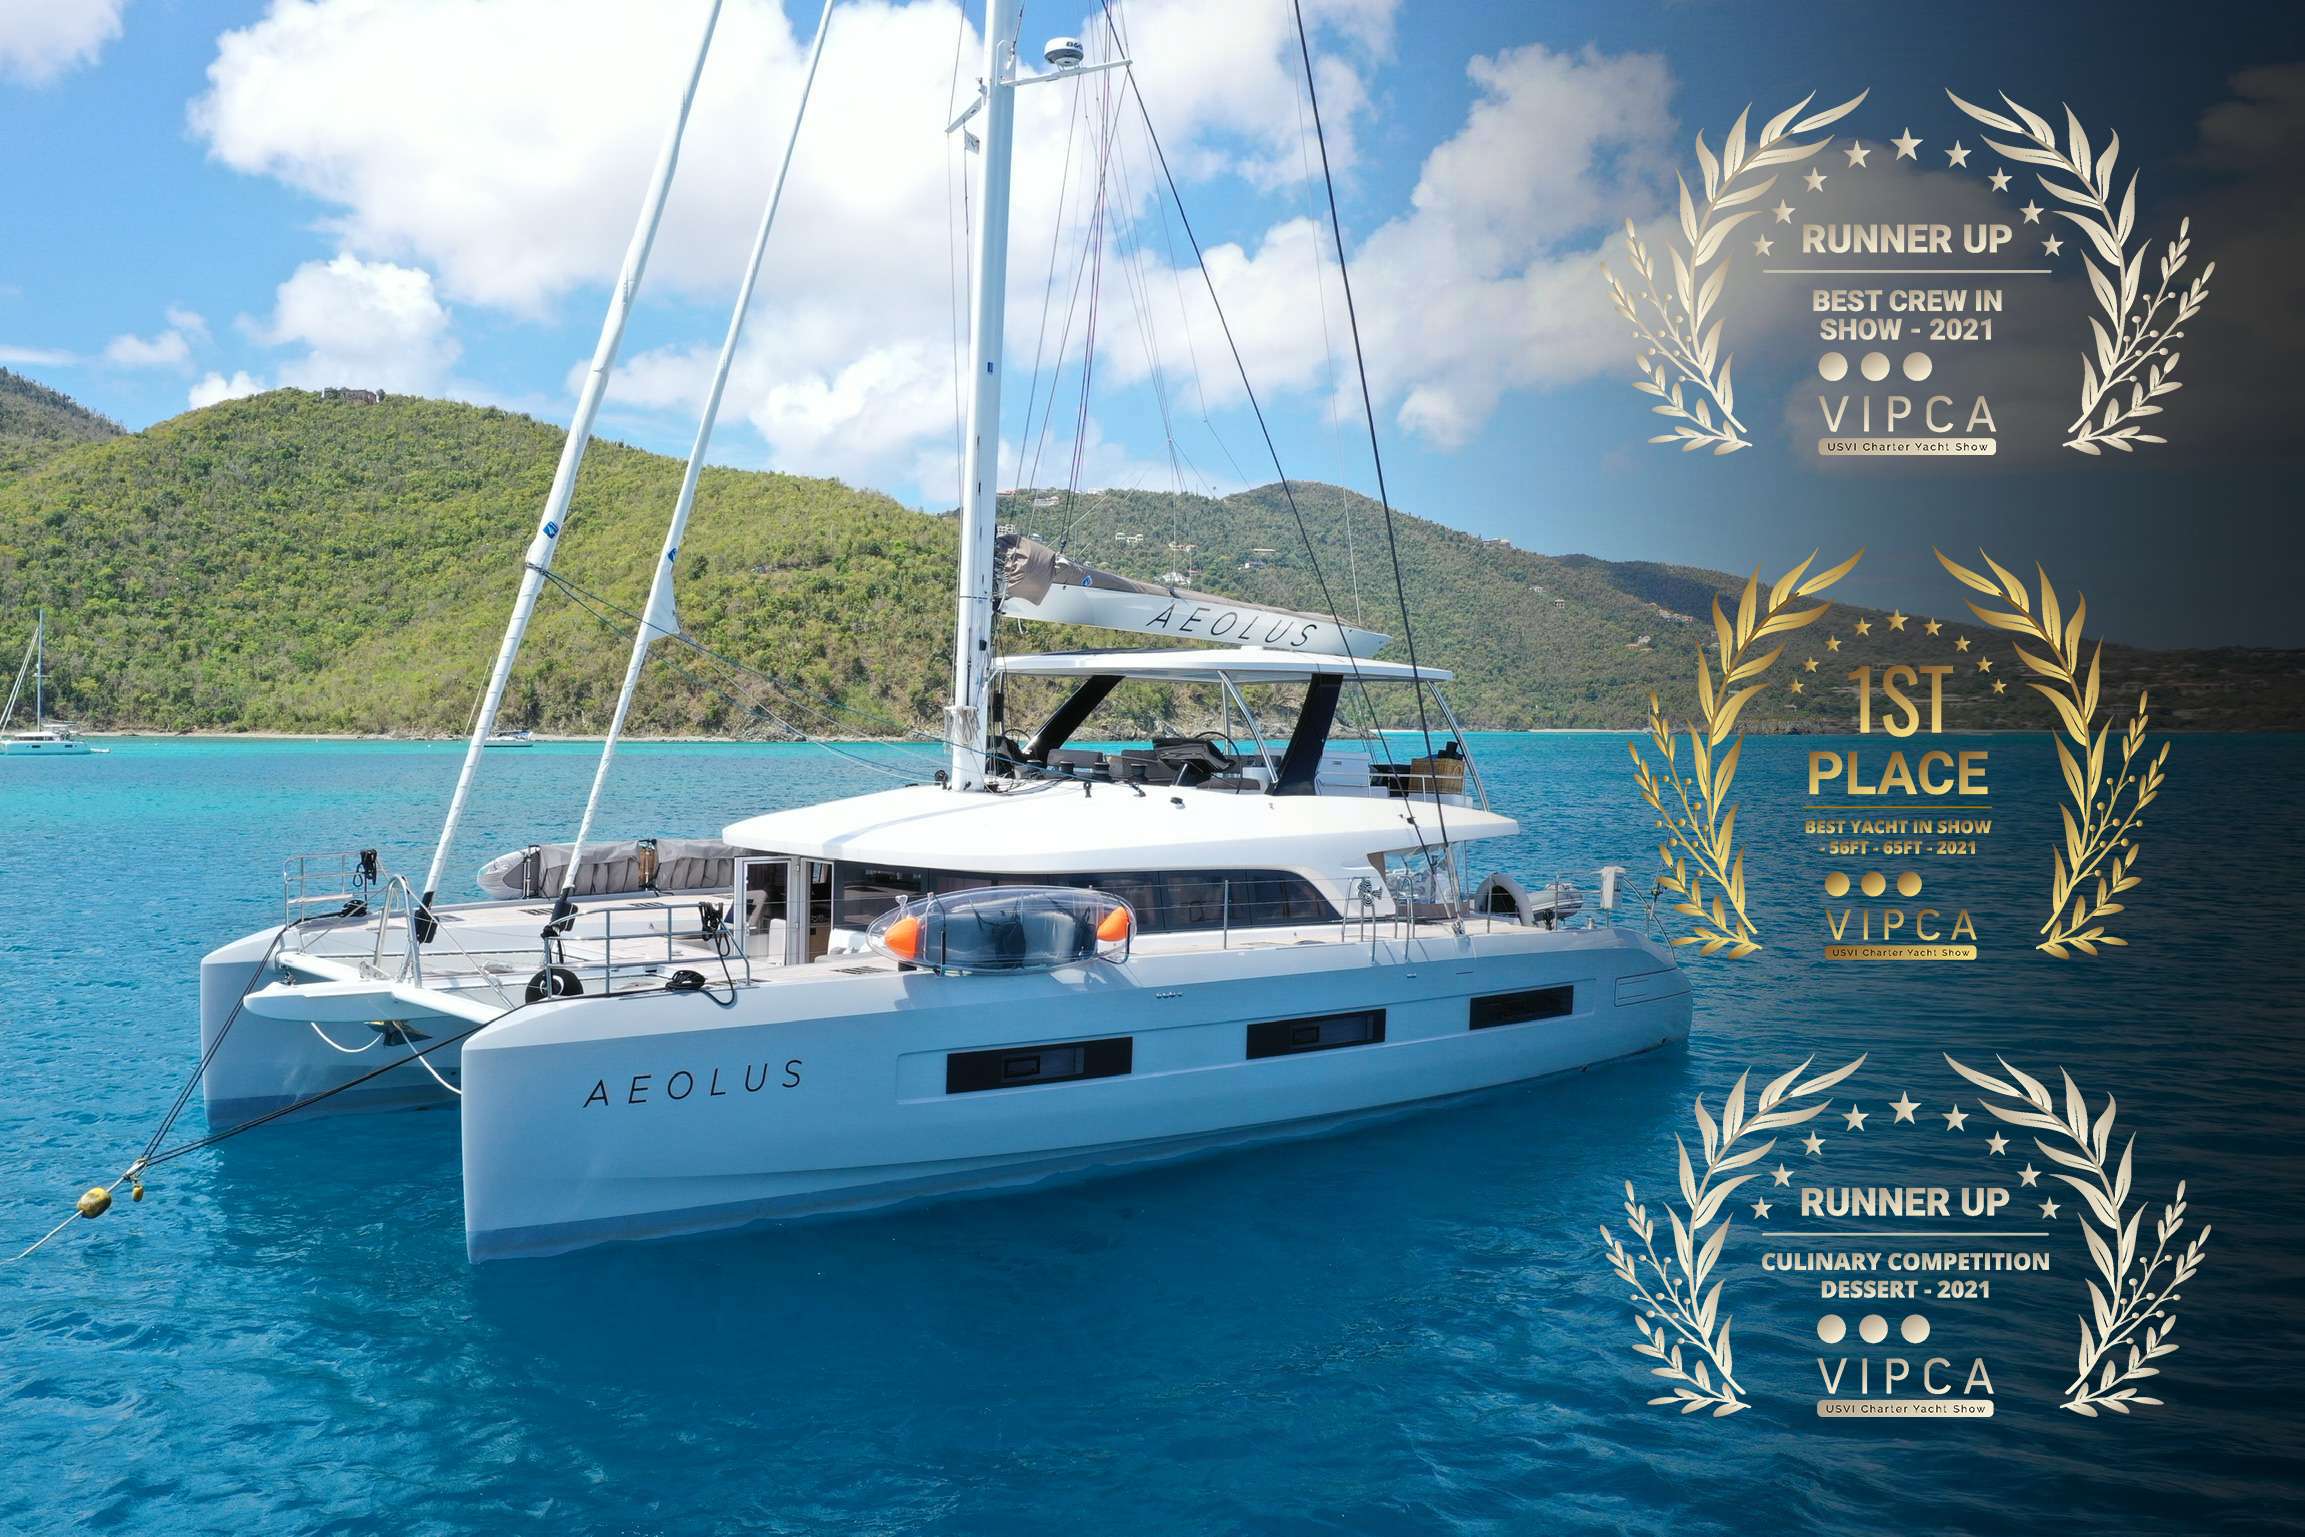 AEOLUS - Yacht Charter East End Bay & Boat hire in Caribbean 1